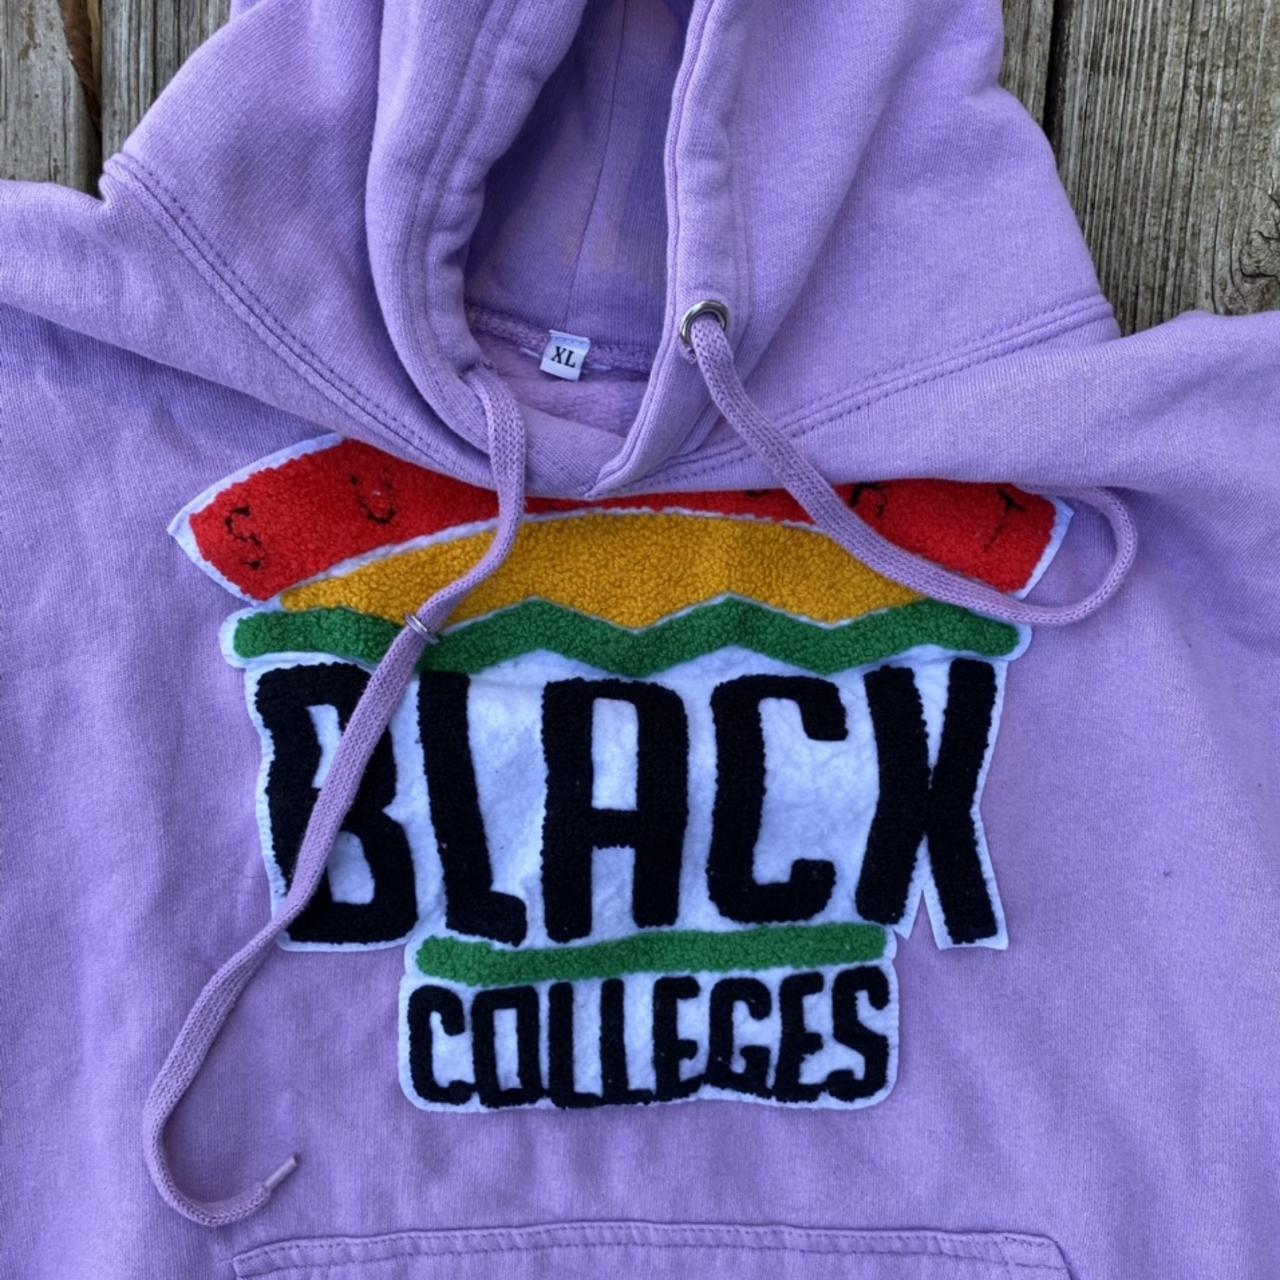 Support Black Colleges + Rock a Dope Hoodie - My Pretty Brown Eats